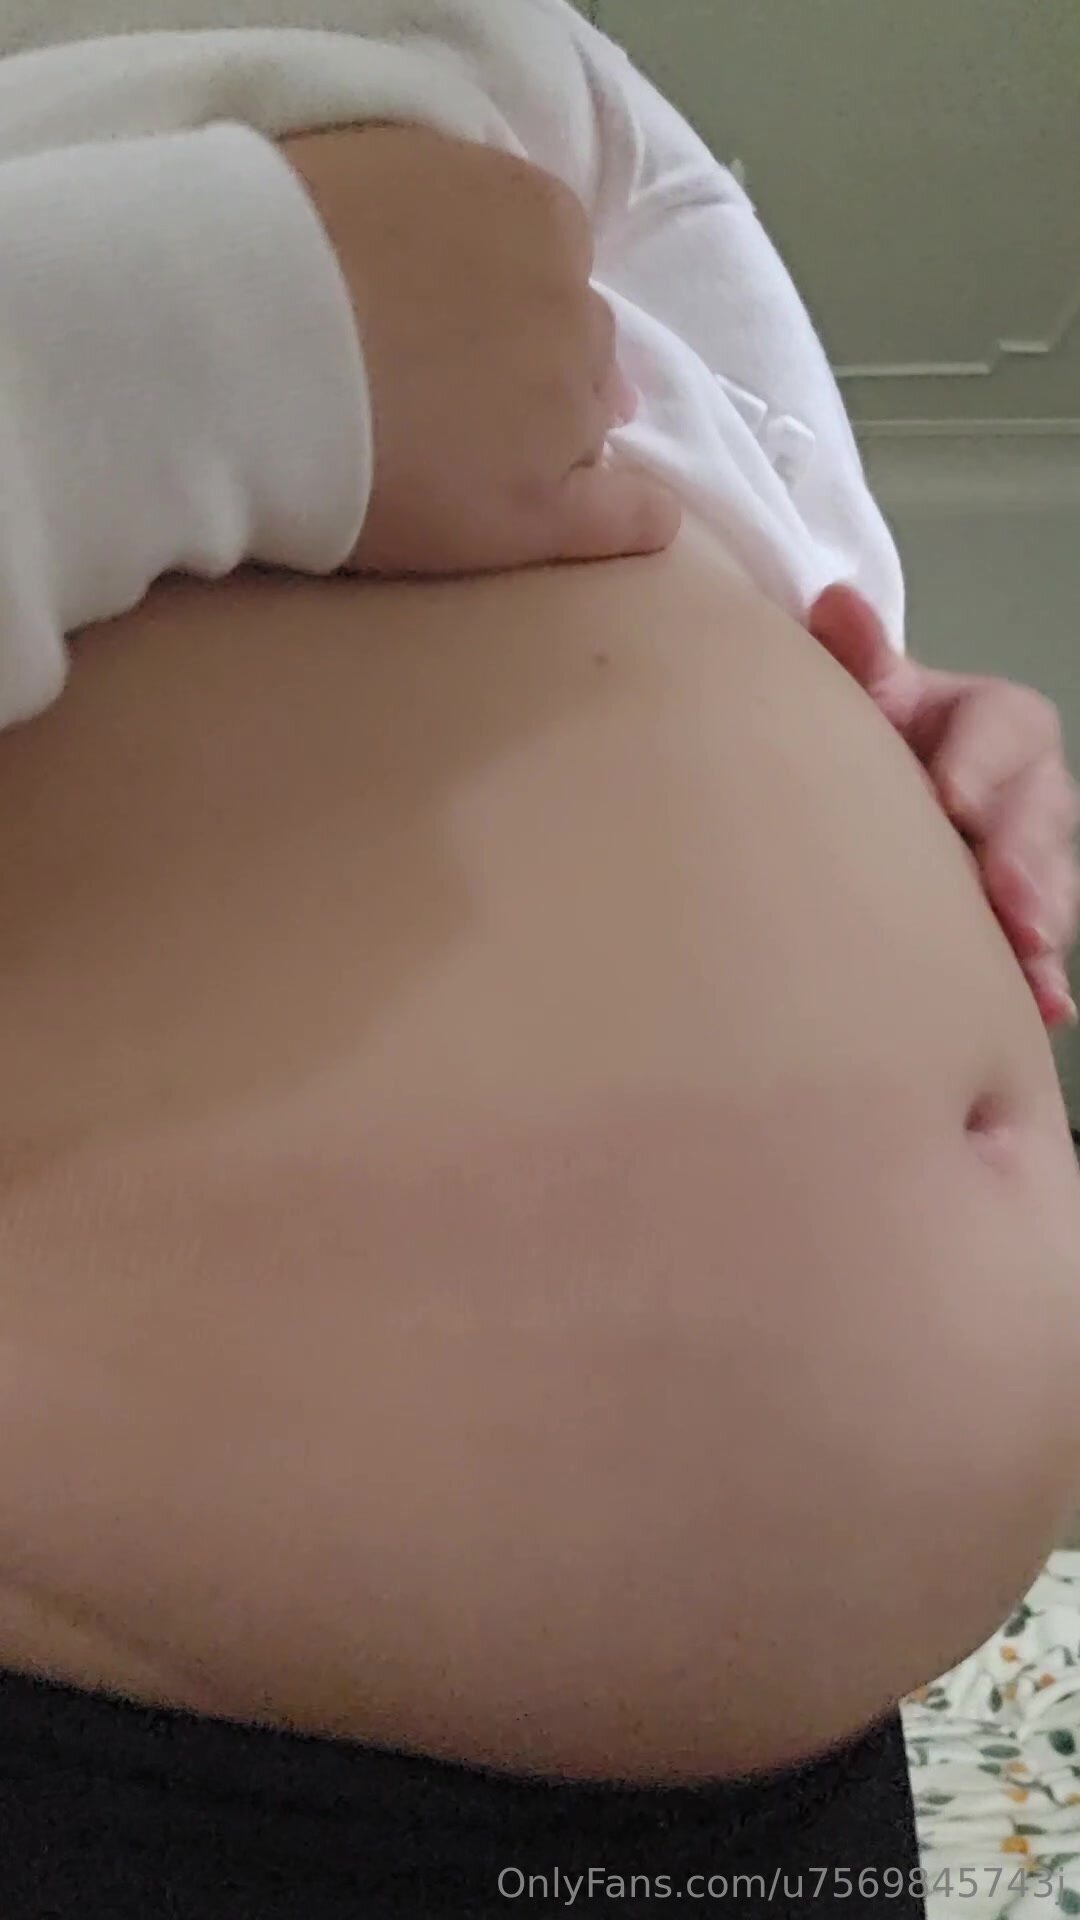 belly play - video 59